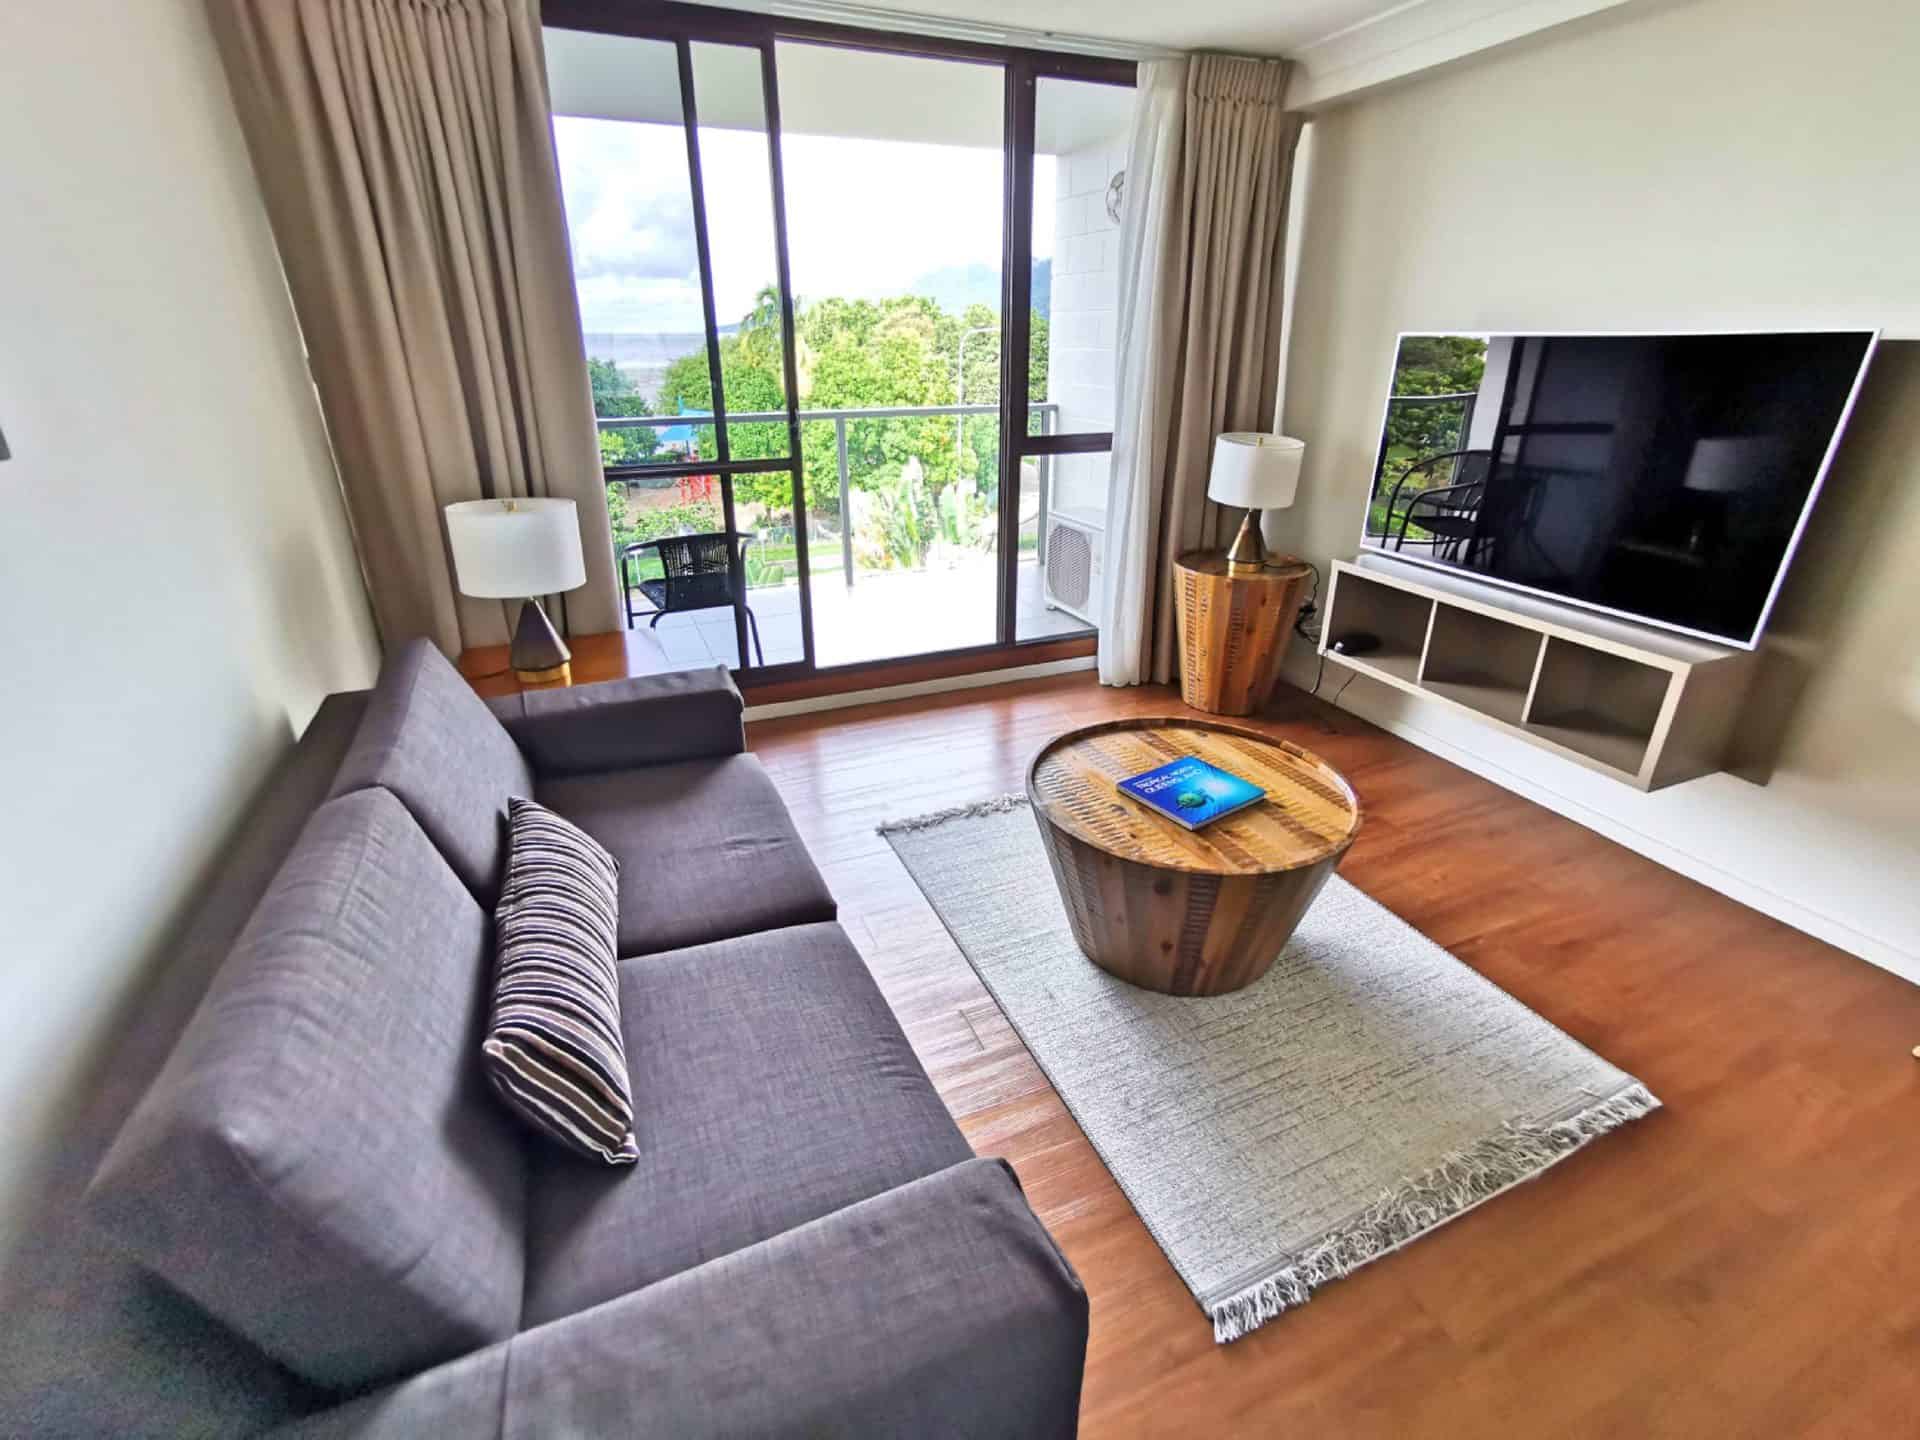 Suite at Cairns Plaza Hotel // Travel Mermaid